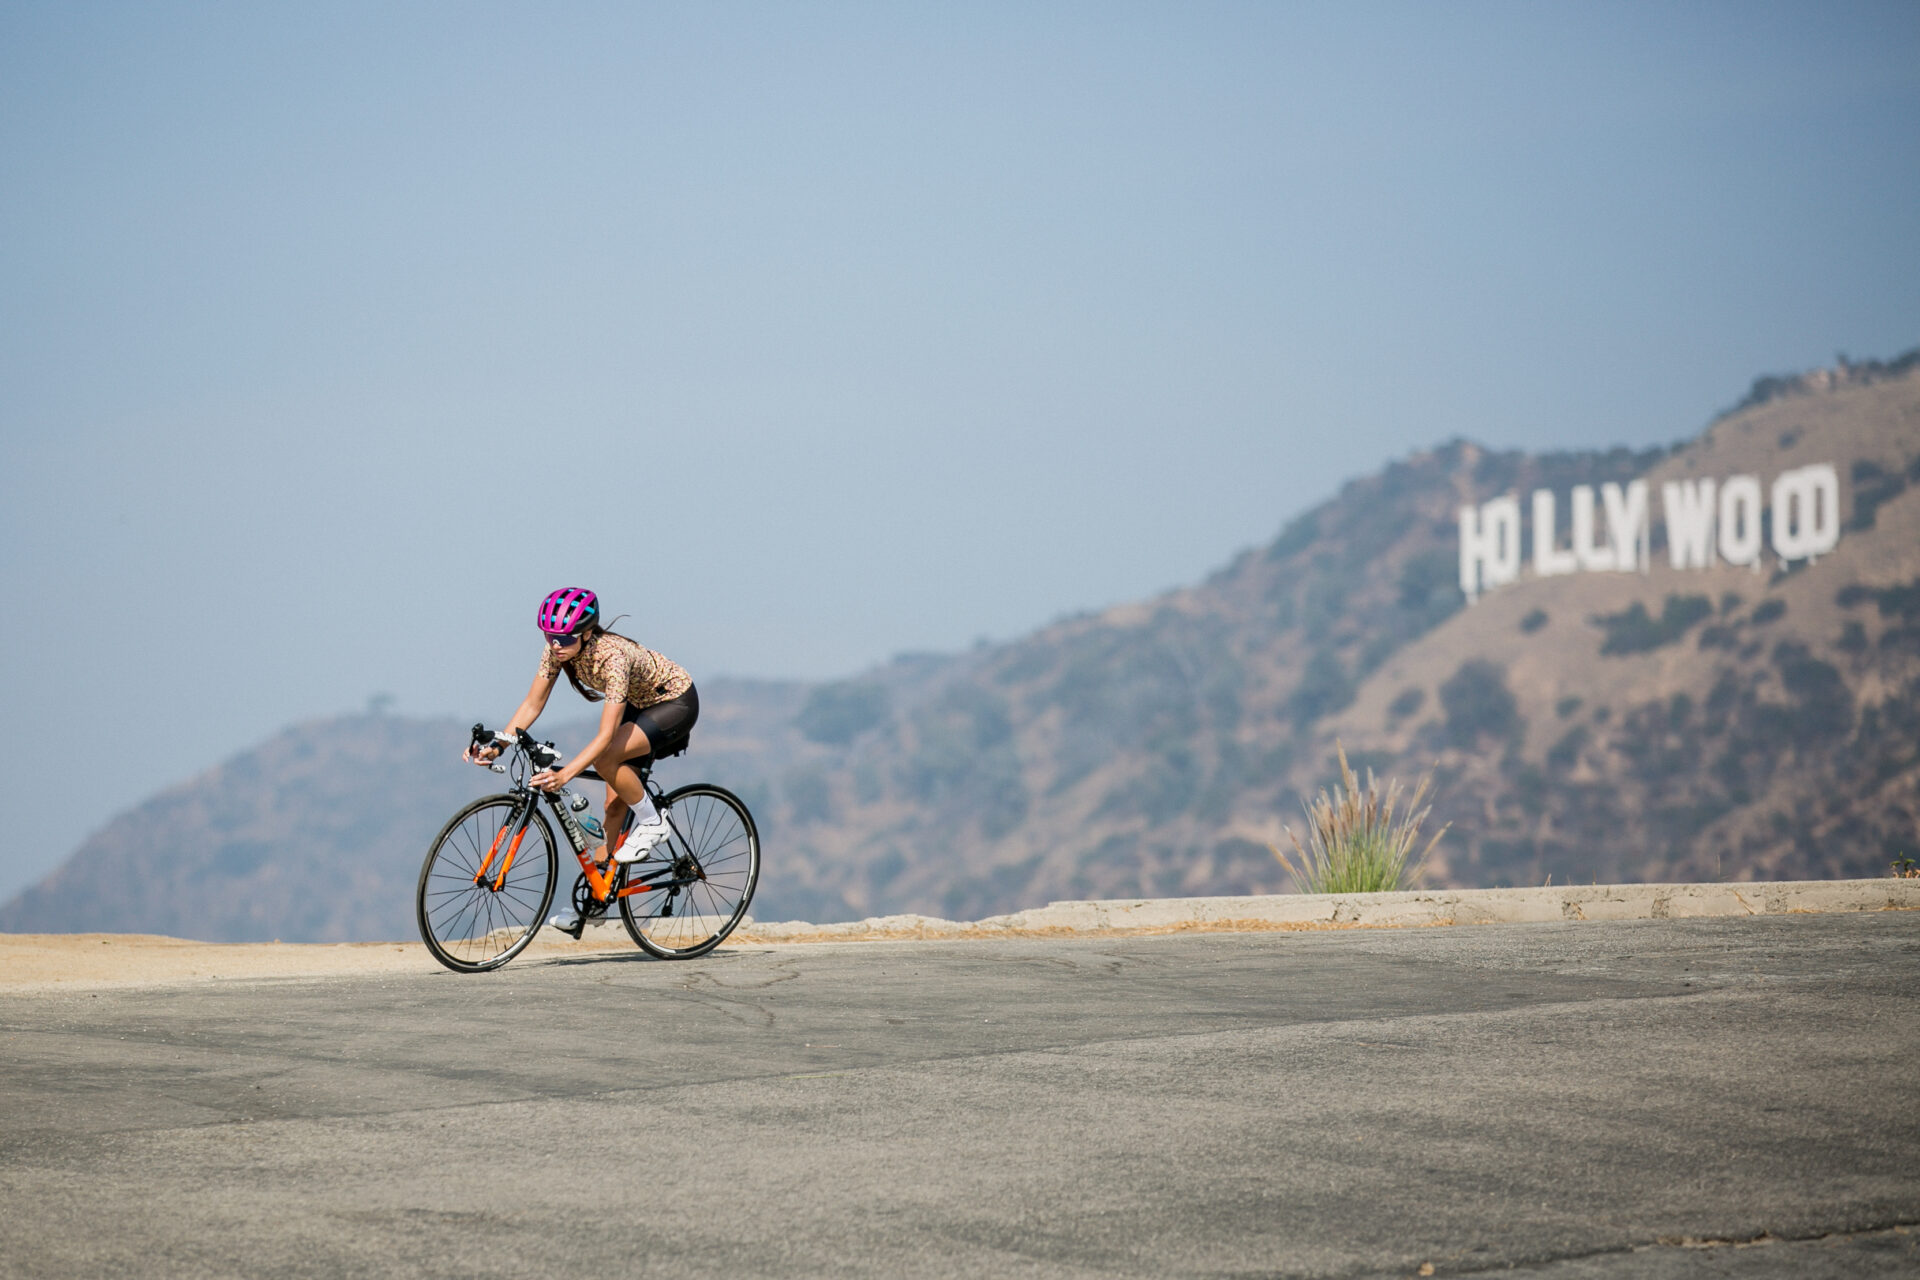 Rider pedaling by the Hollywood sign